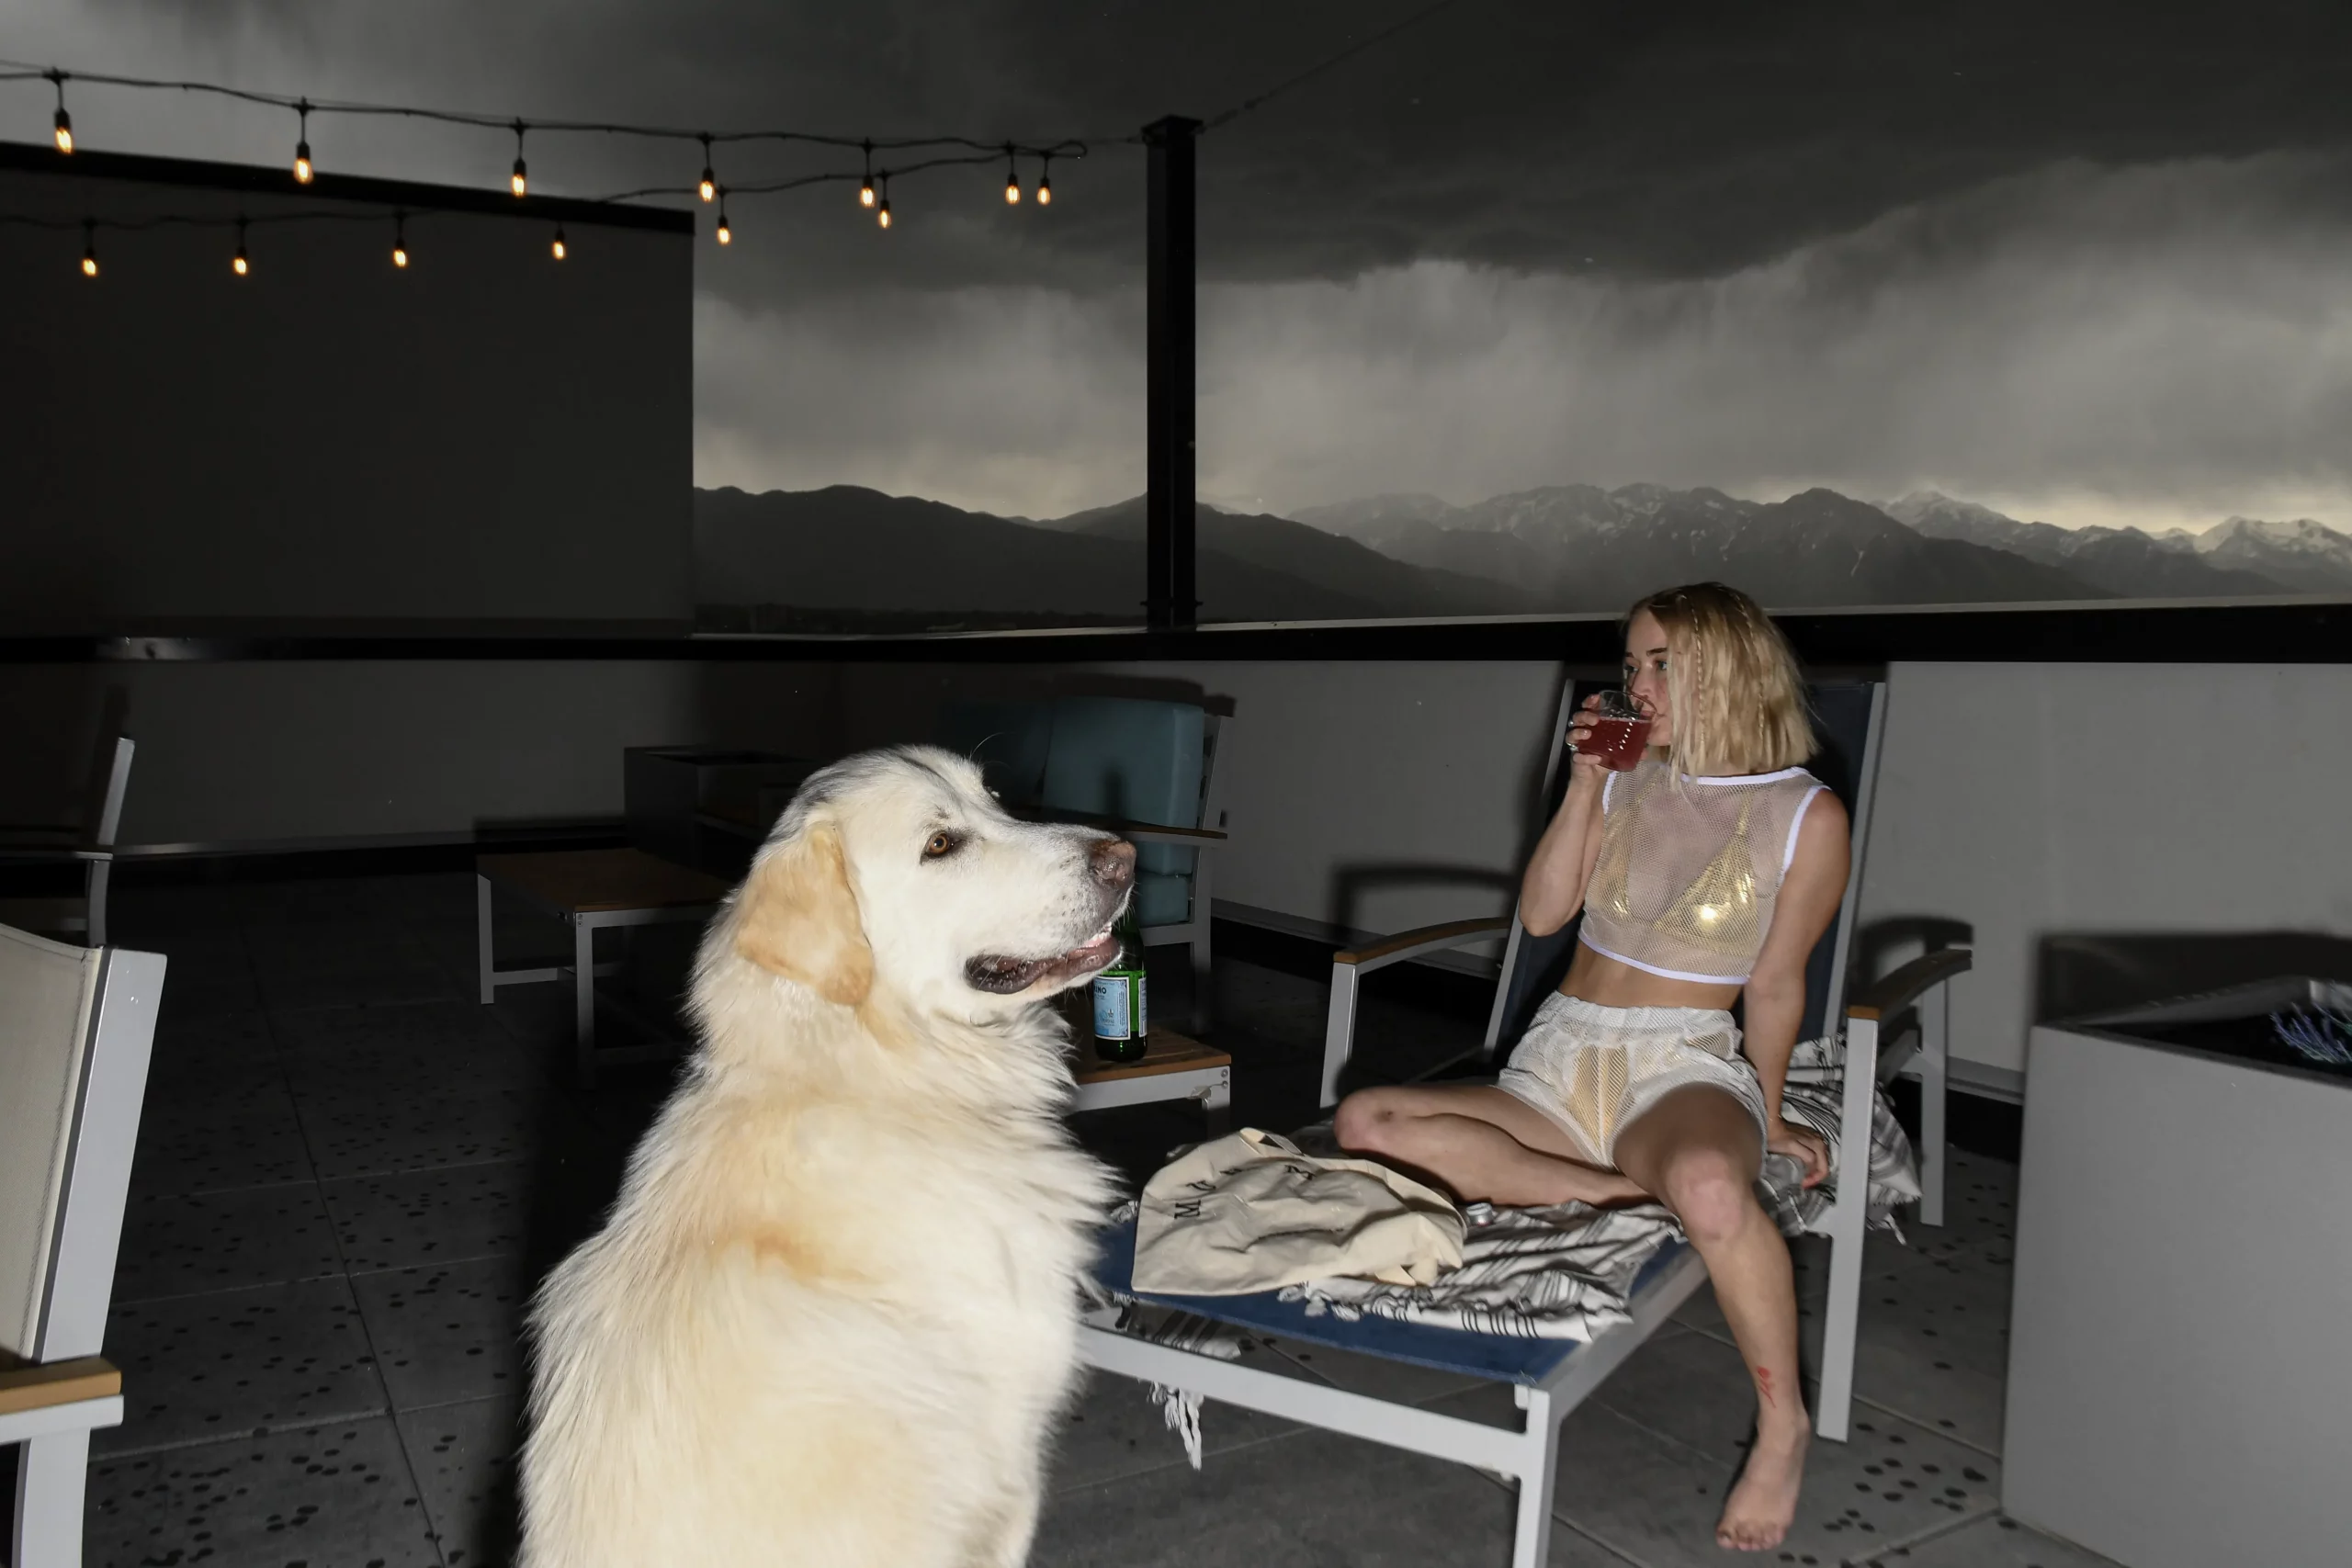 Image of a blonde woman wearing a mesh top, metallic gold bikini and white shorts drinking a cocktail on a chaise lounge. On her left is. large white dog.